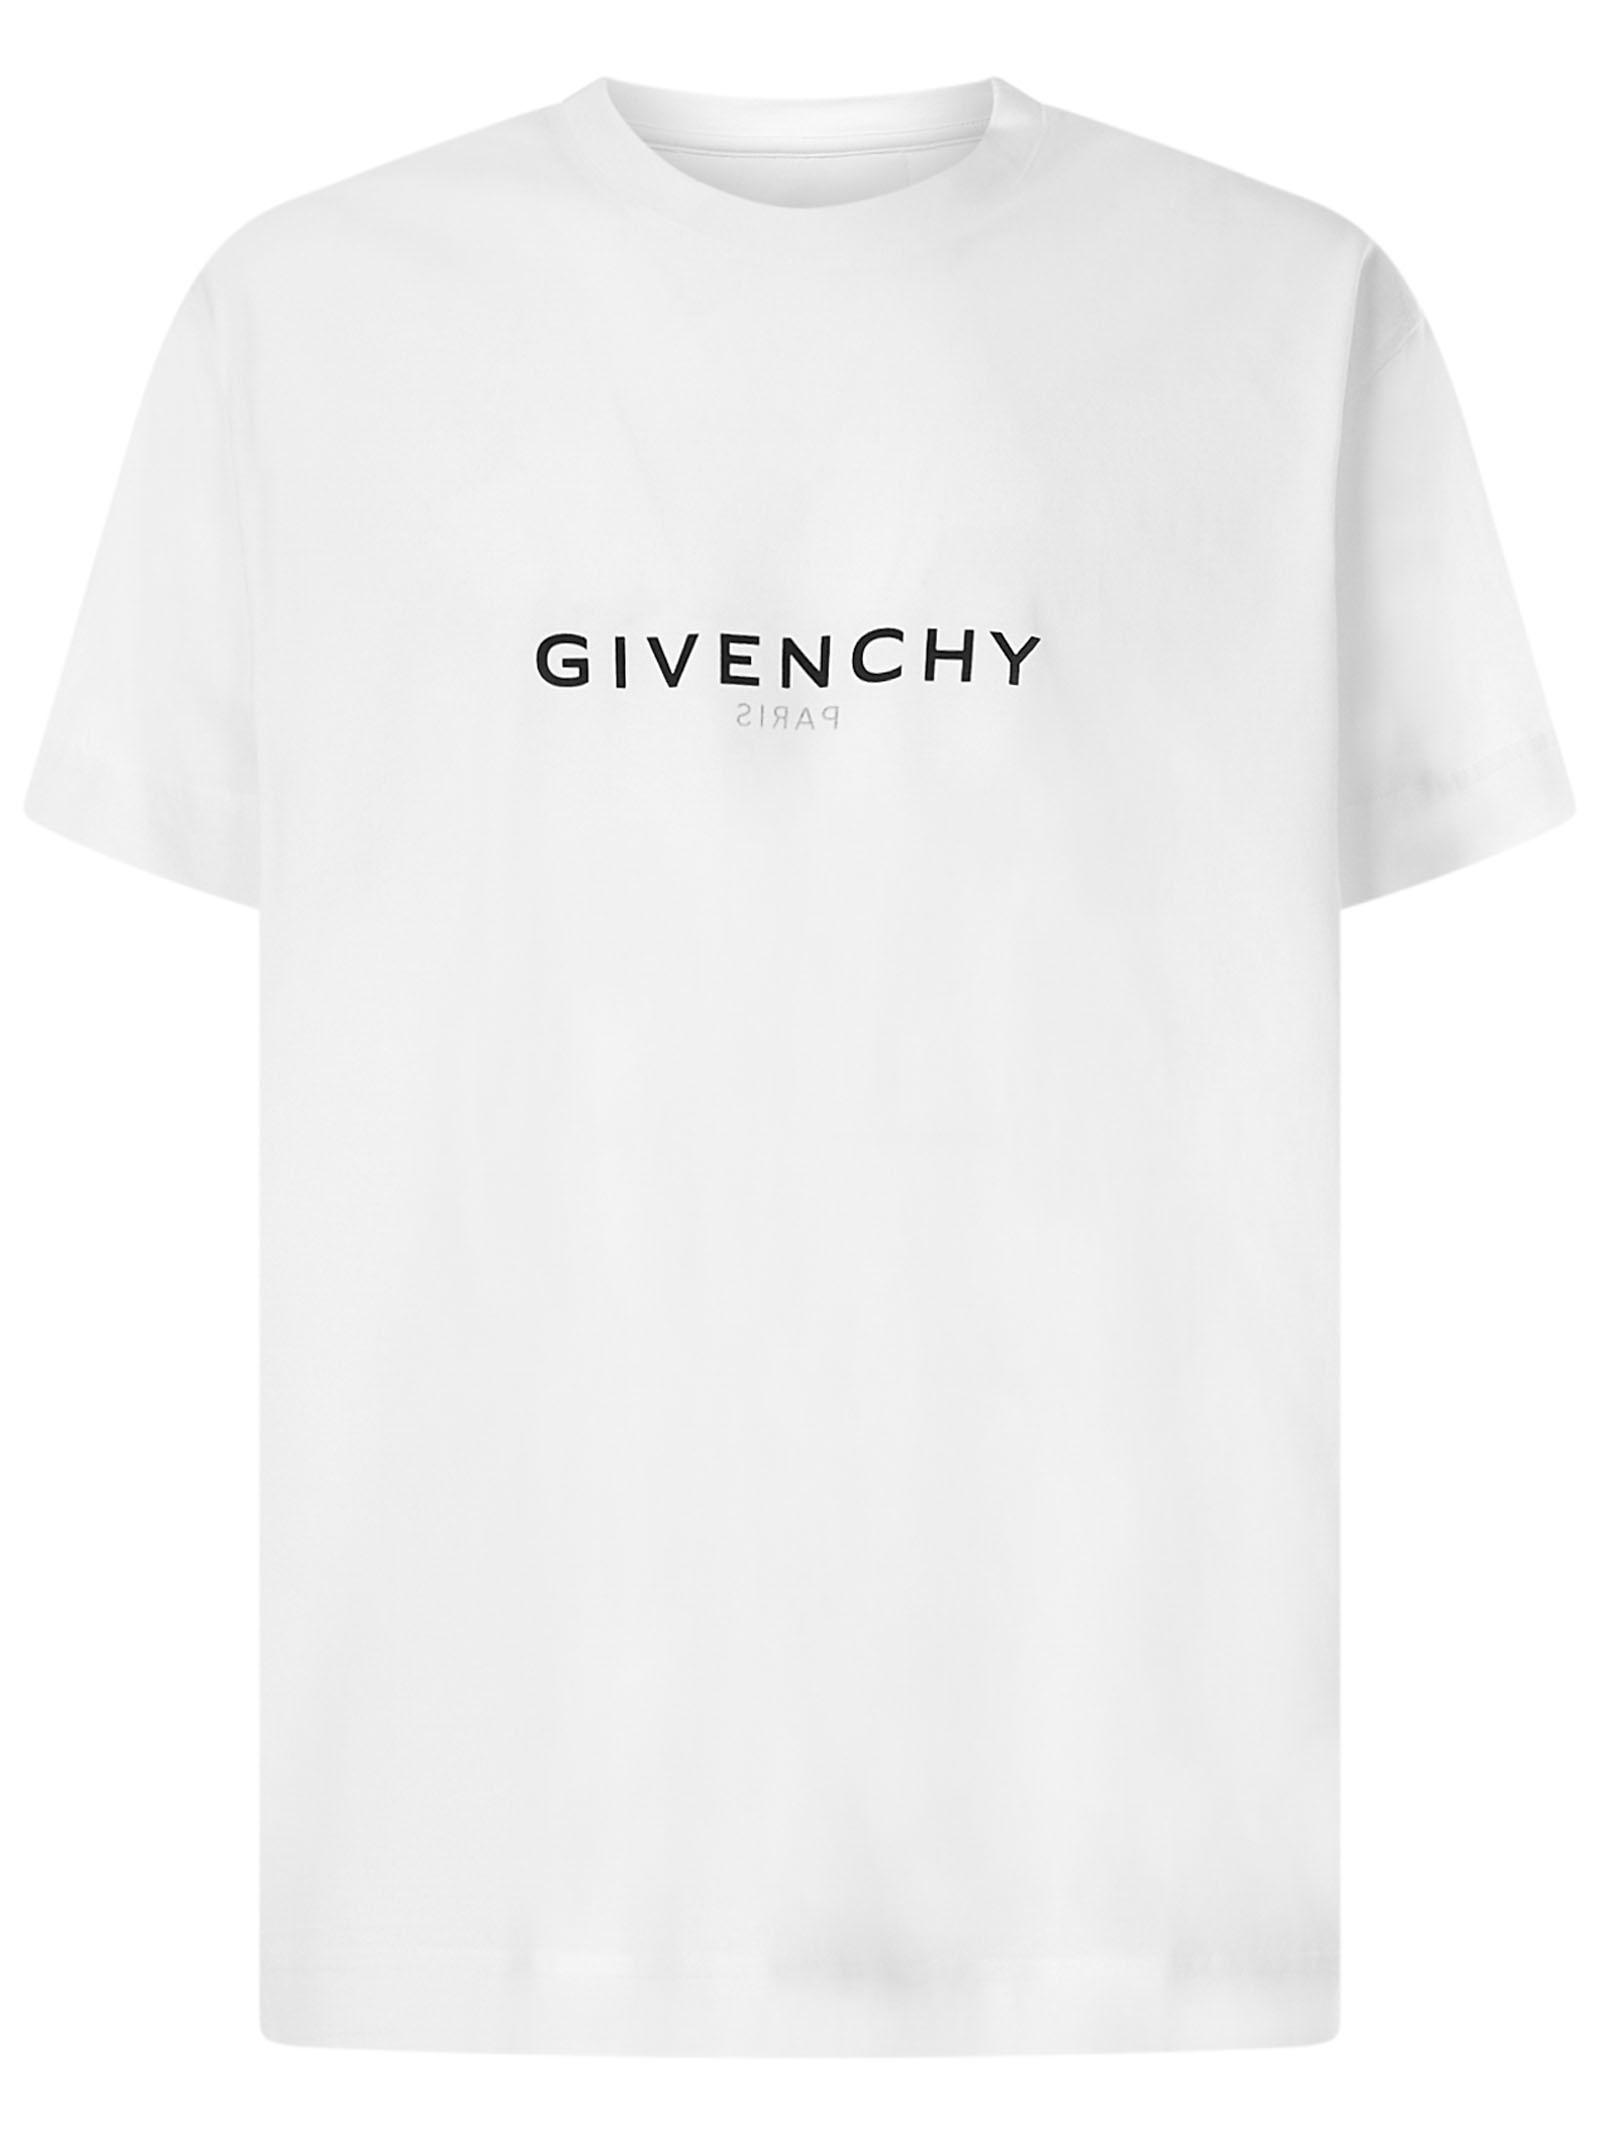 Givenchy Cotton Reverset-shirt in White for Men - Lyst